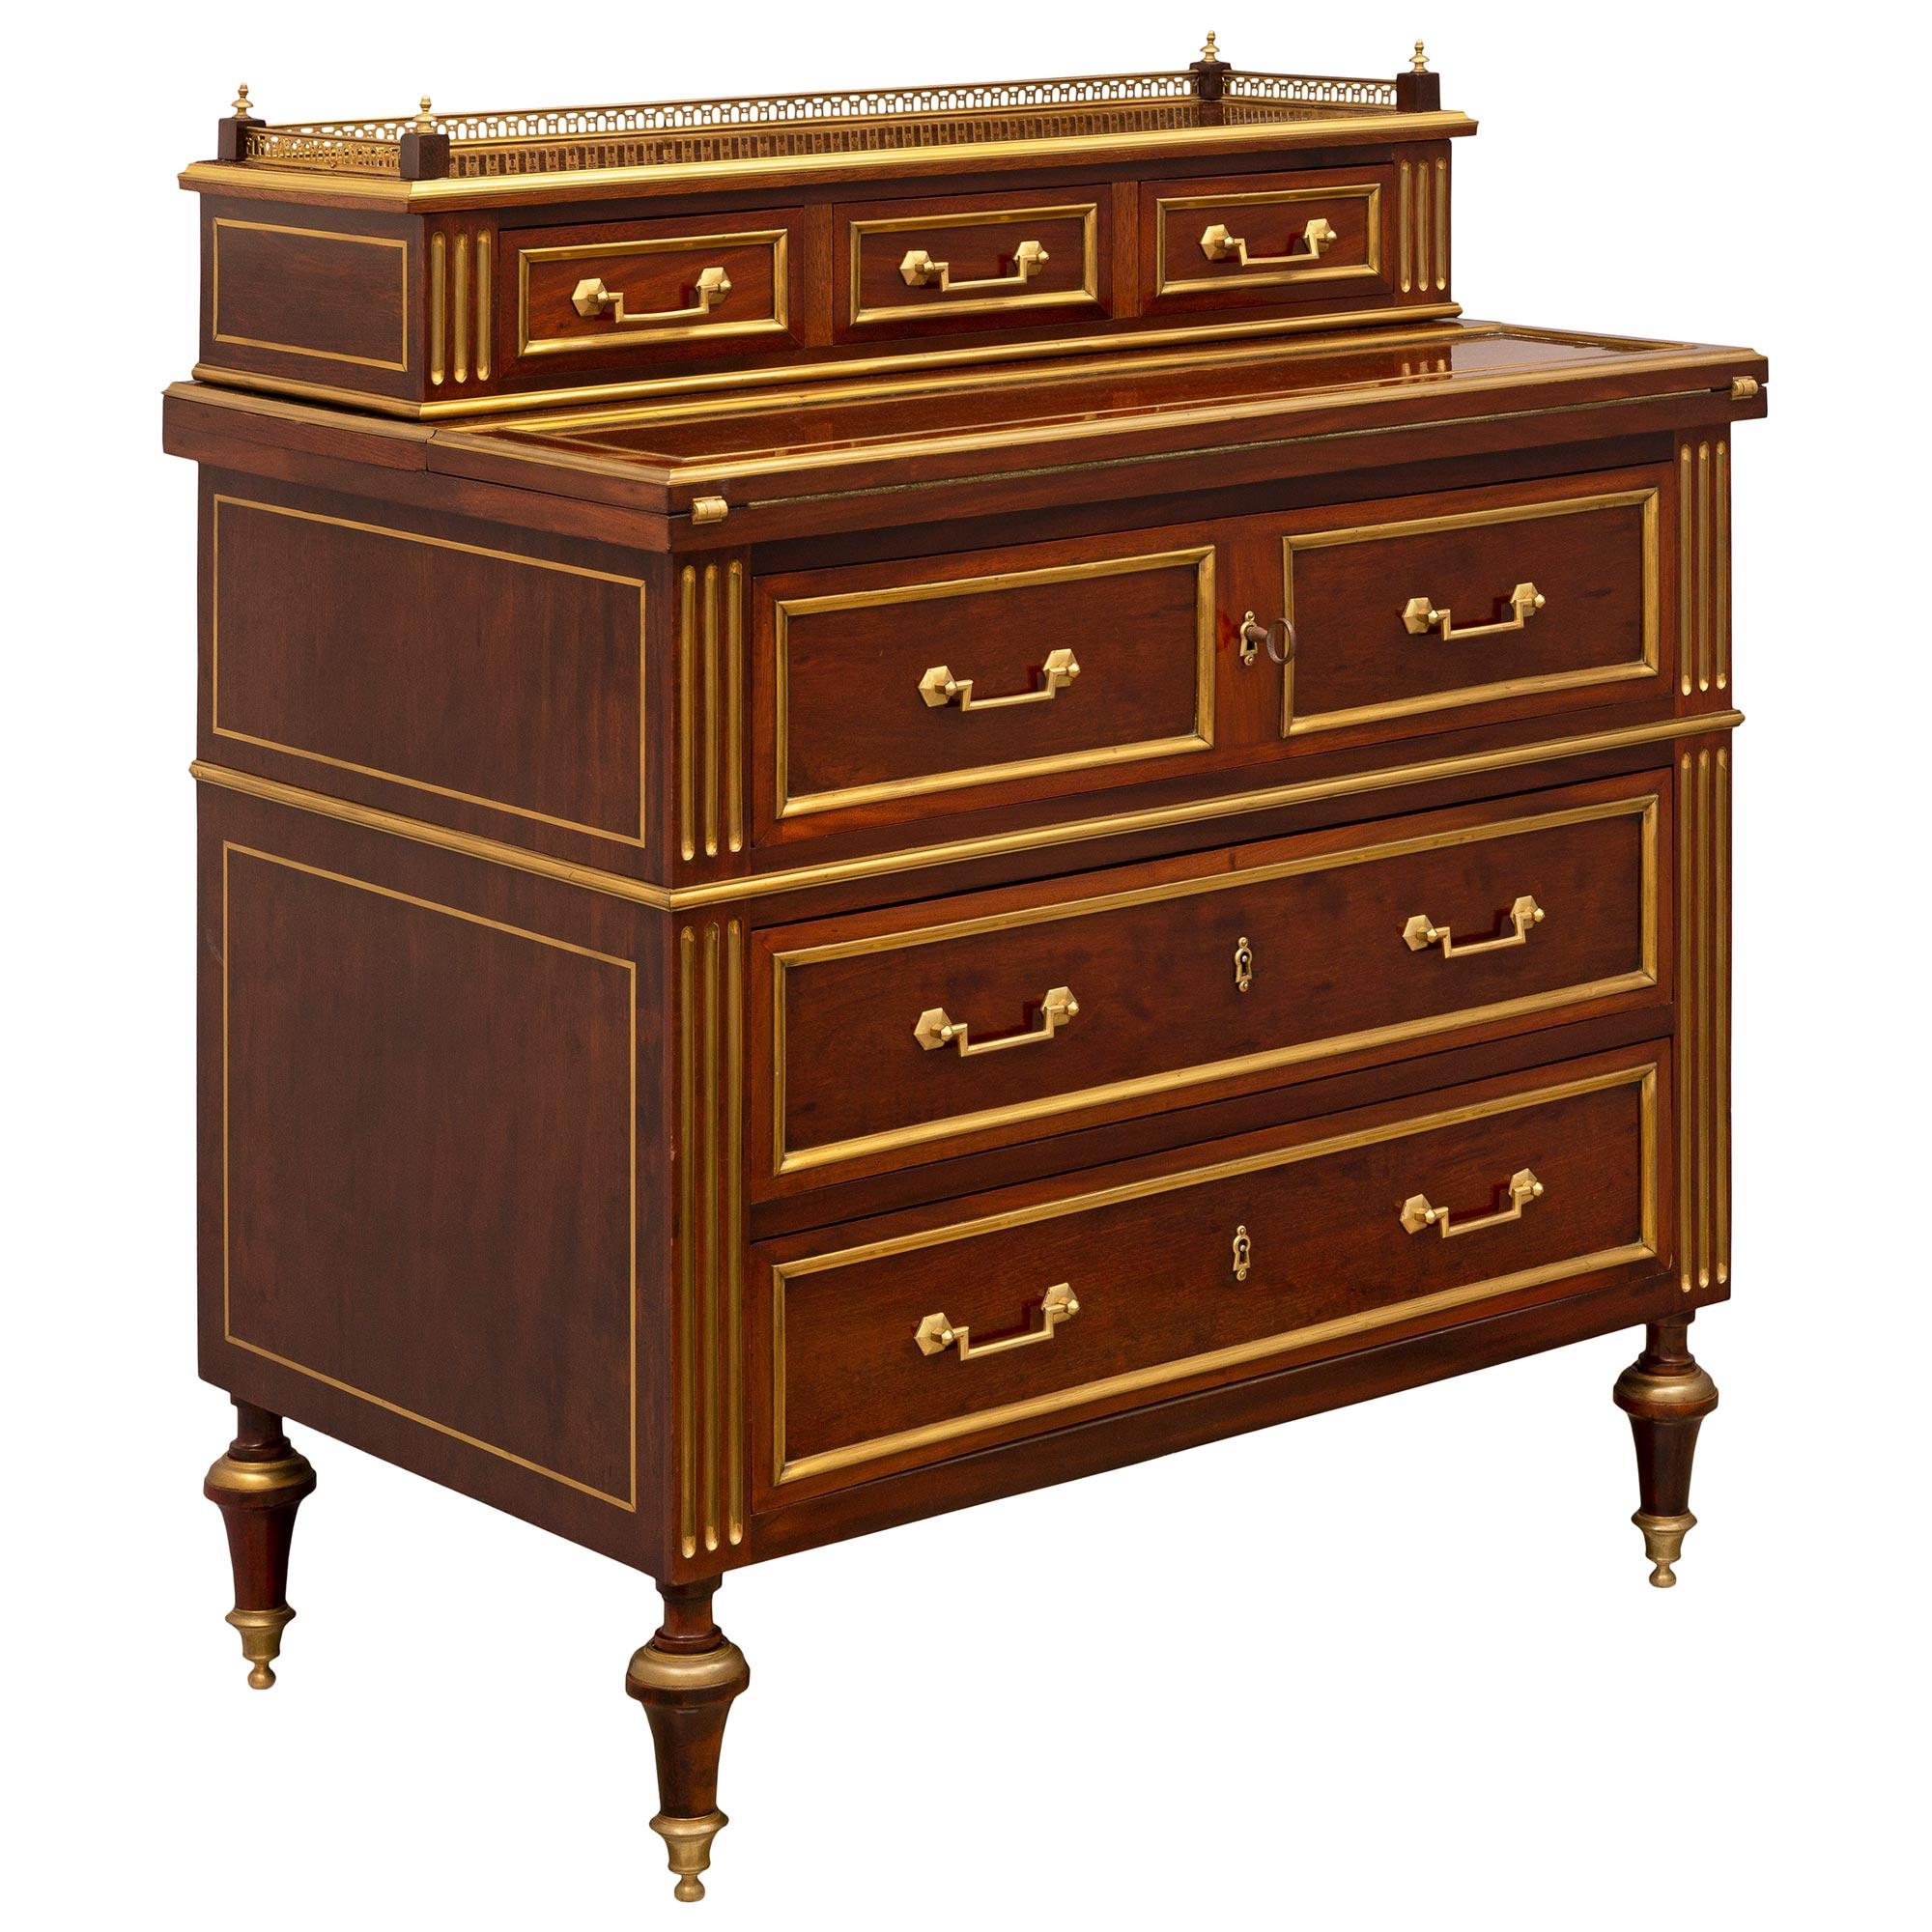 An elegant and high quality French 19th century Louis XVI st. Mahogany, ormolu, and brass desk. The six drawer Bonheur du Jour desk is raised by most decorative slender topie shaped legs with delicately fitted ball sabots below striking fluted